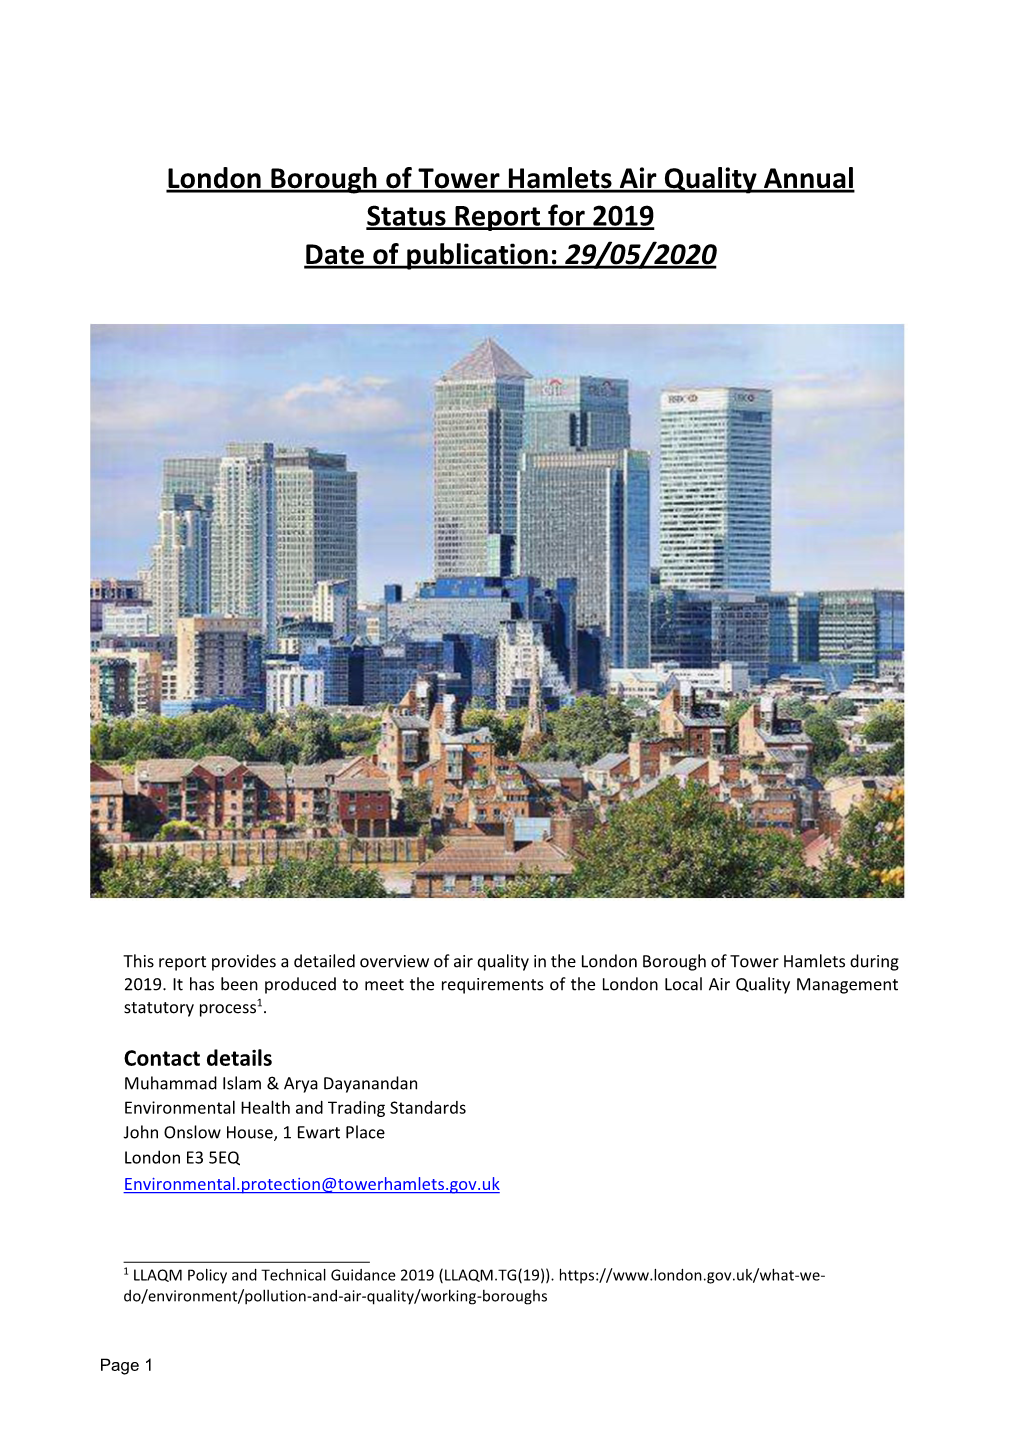 The London Borough of Tower Hamlets Air Quality Annual Status Report for 2019